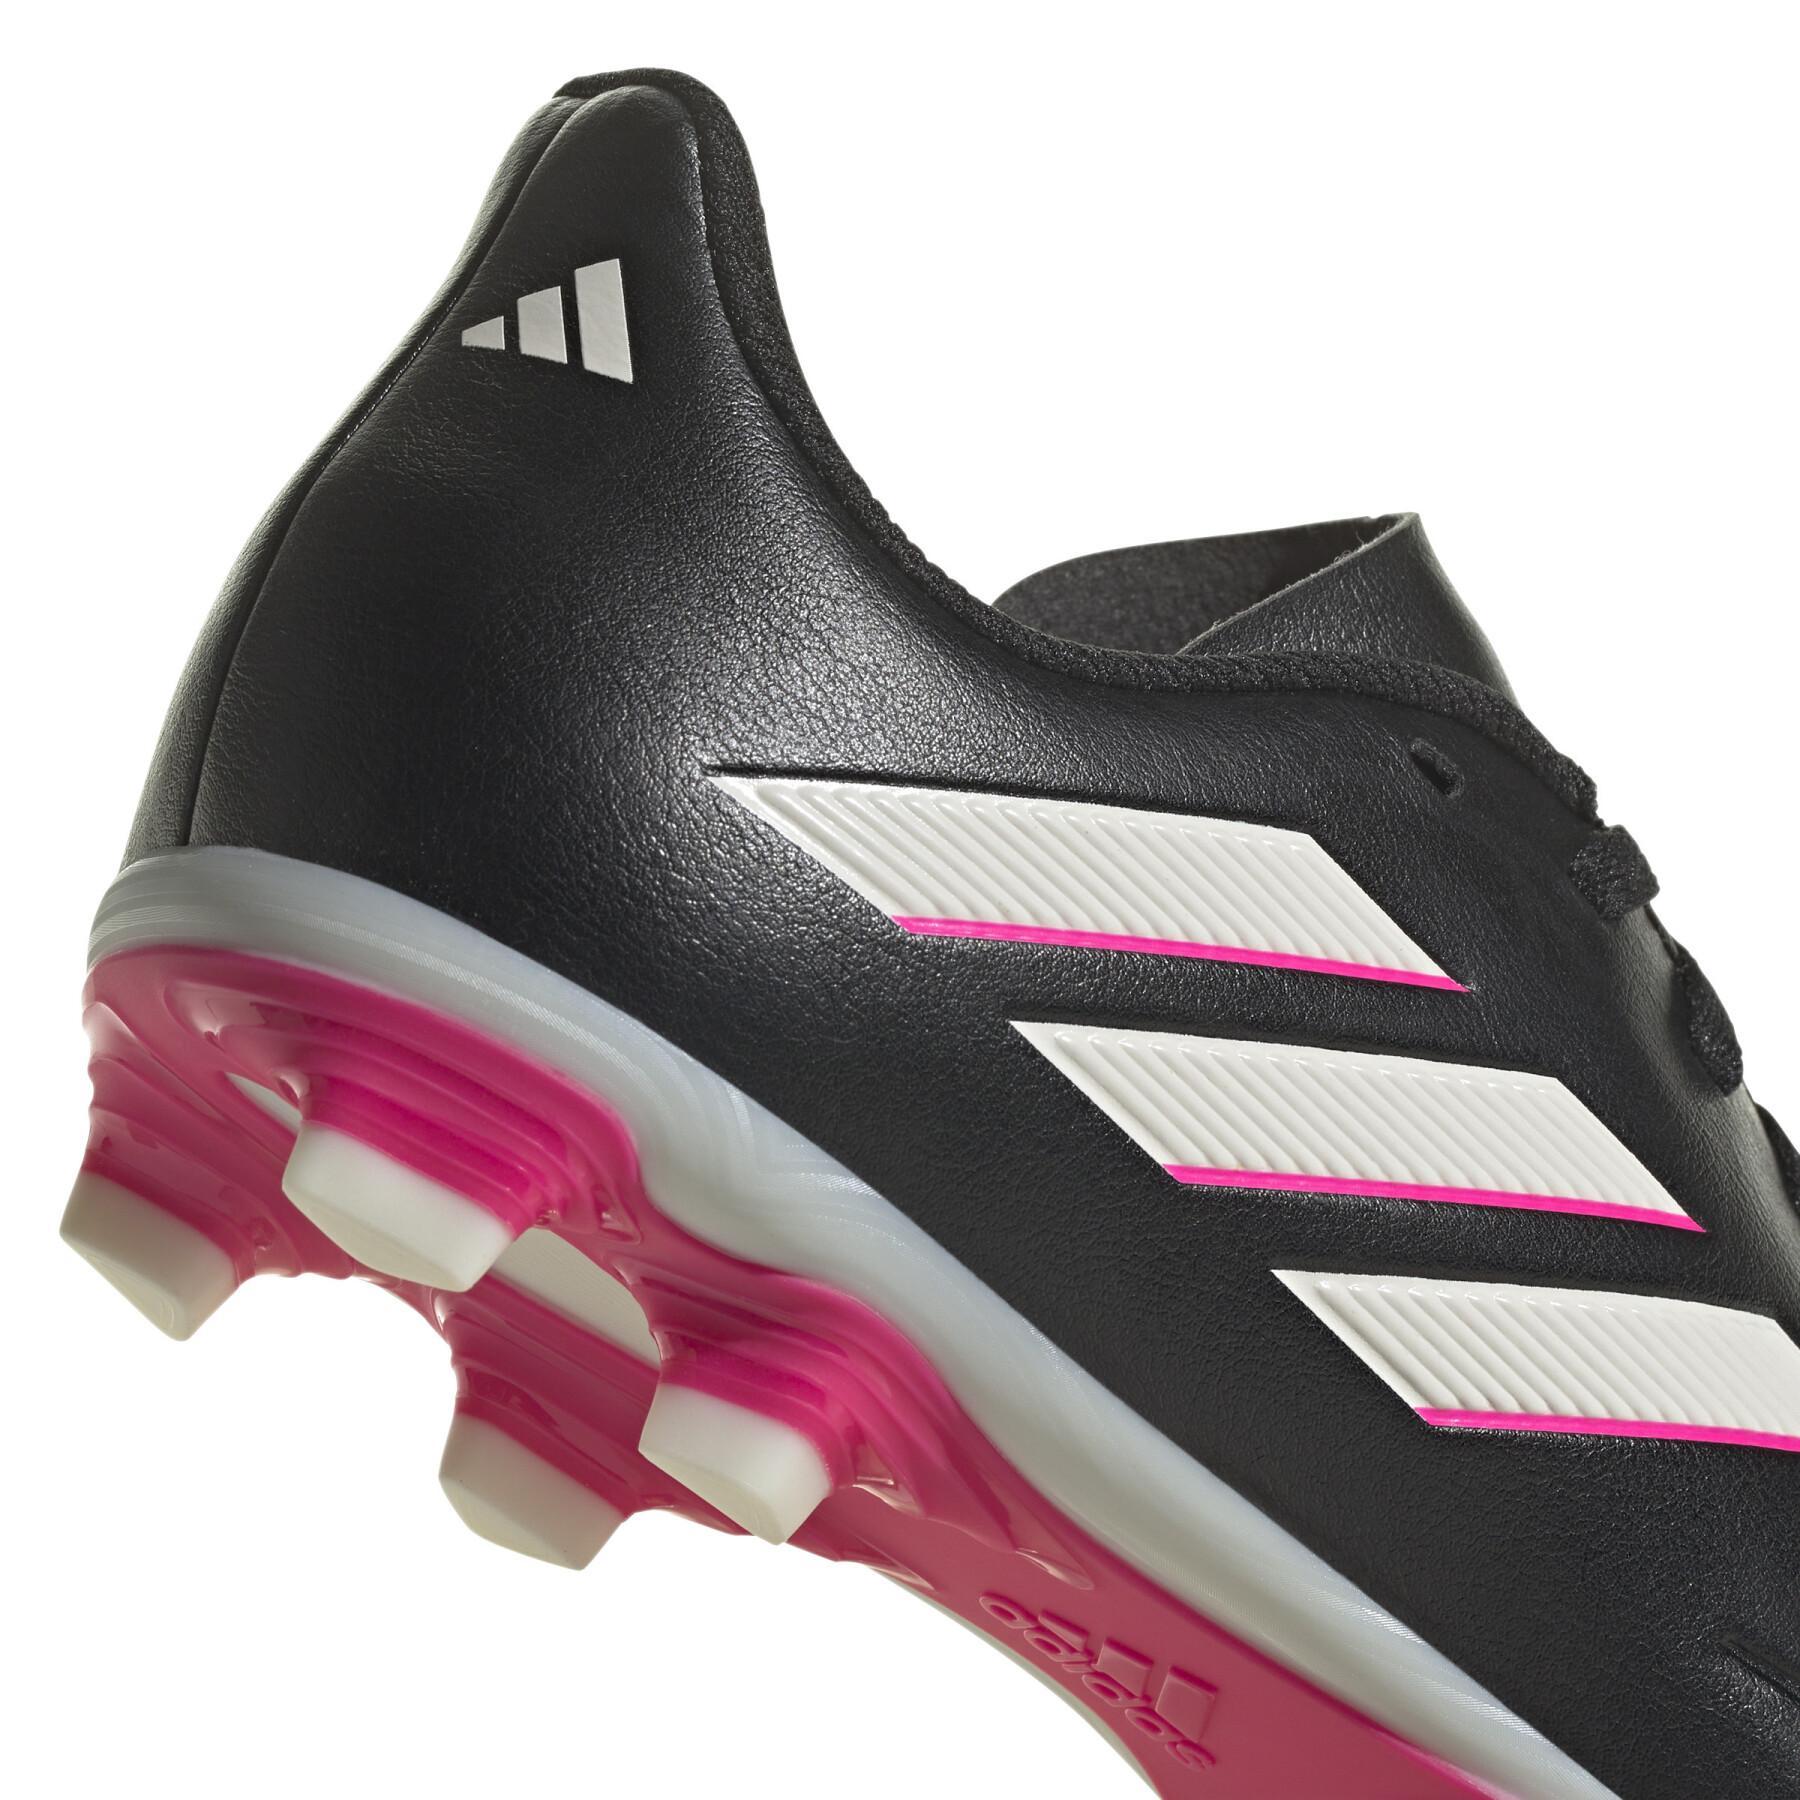 Children's soccer shoes adidas Copa Pure.4